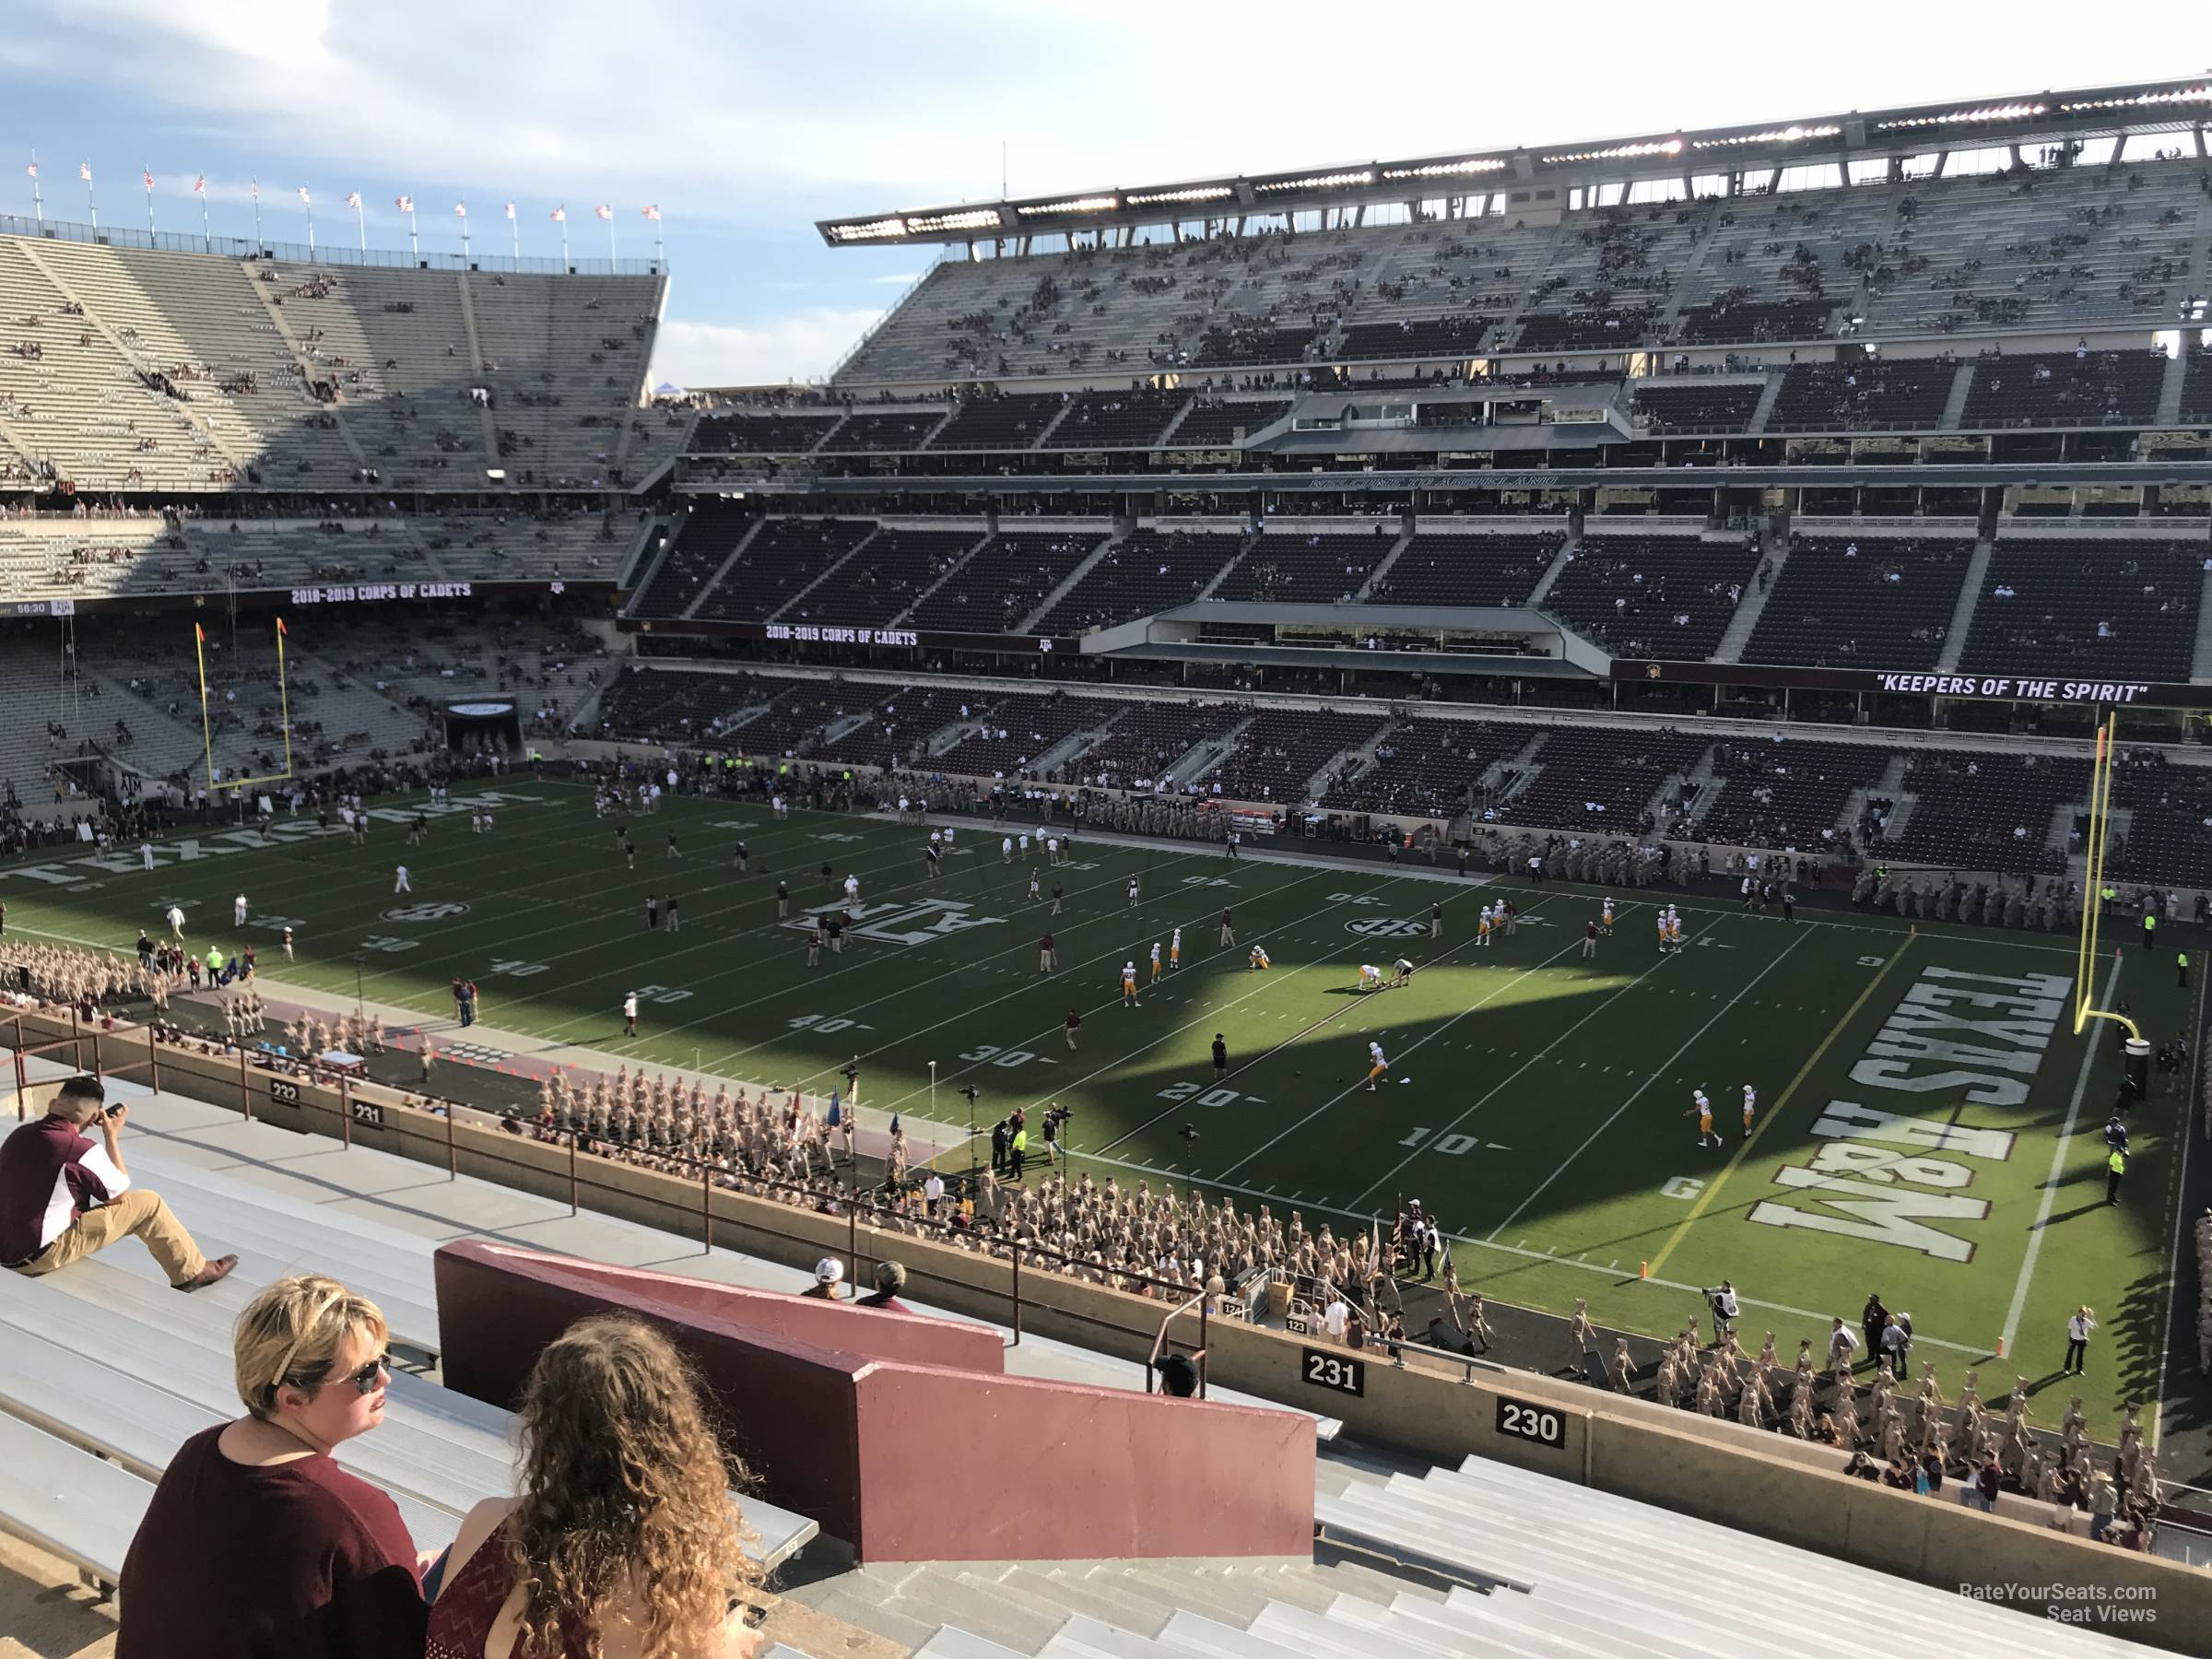 section 230, row 20 seat view  - kyle field